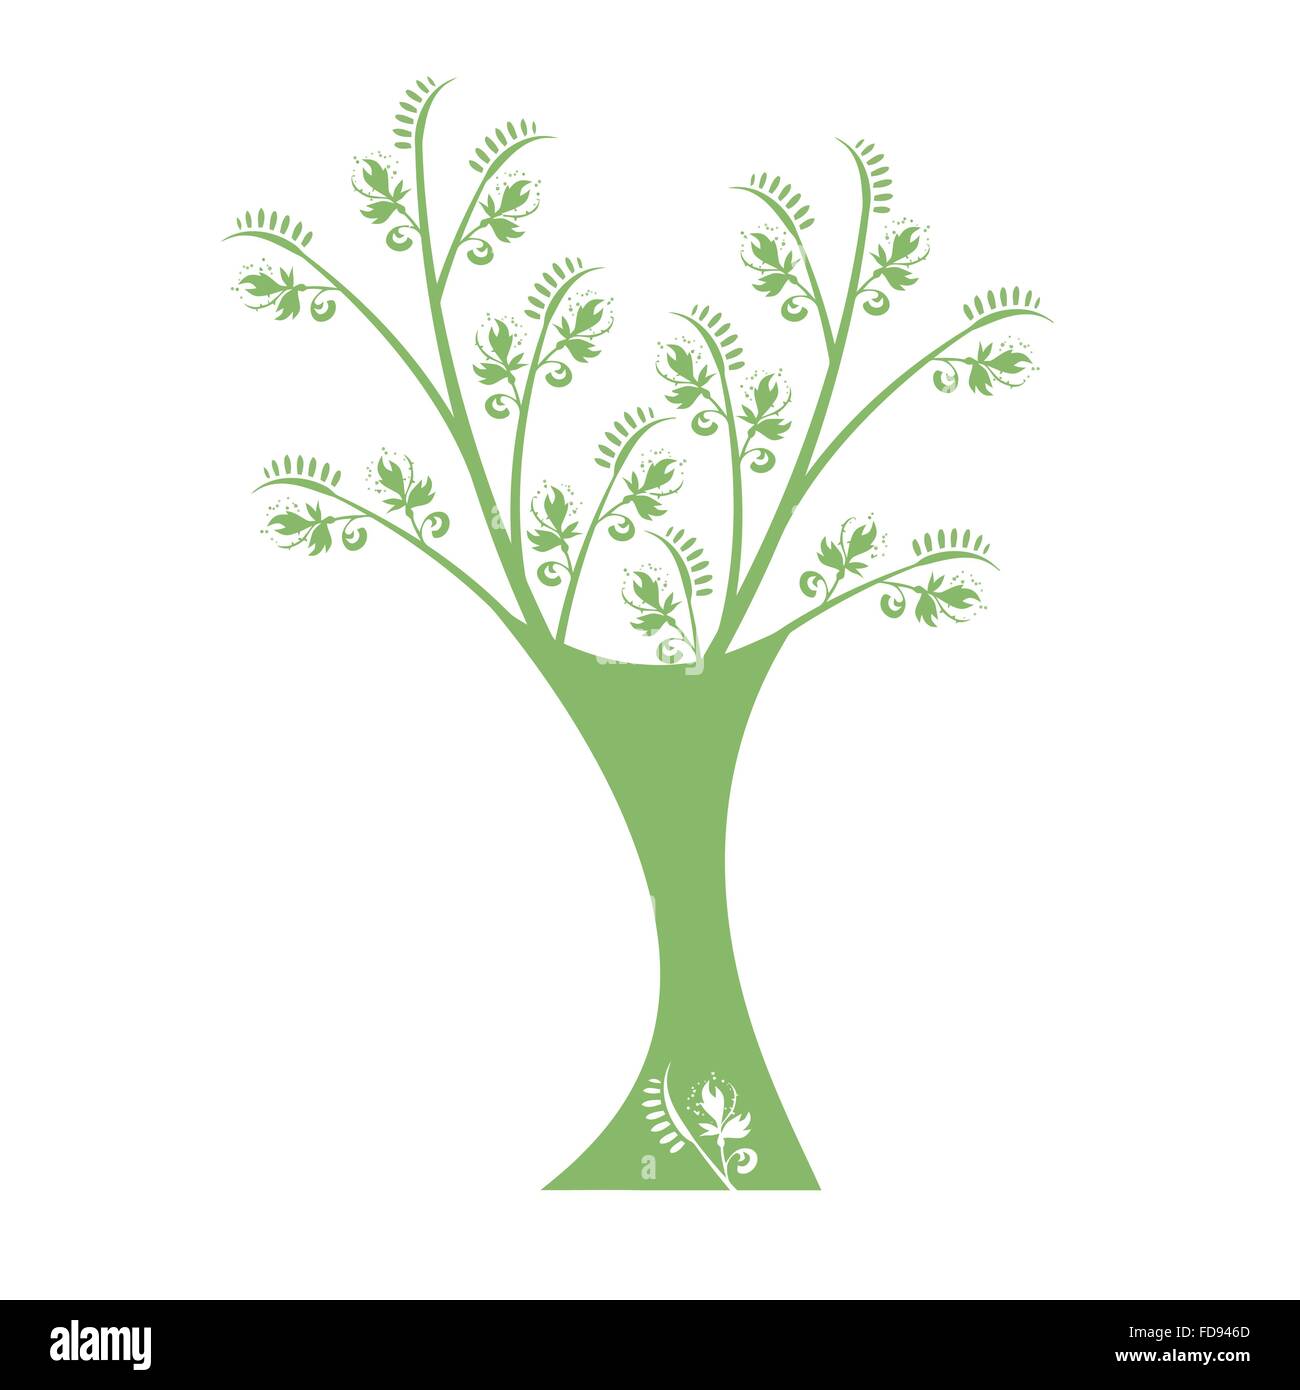 Art tree silhouette isolated on white background Stock Vector